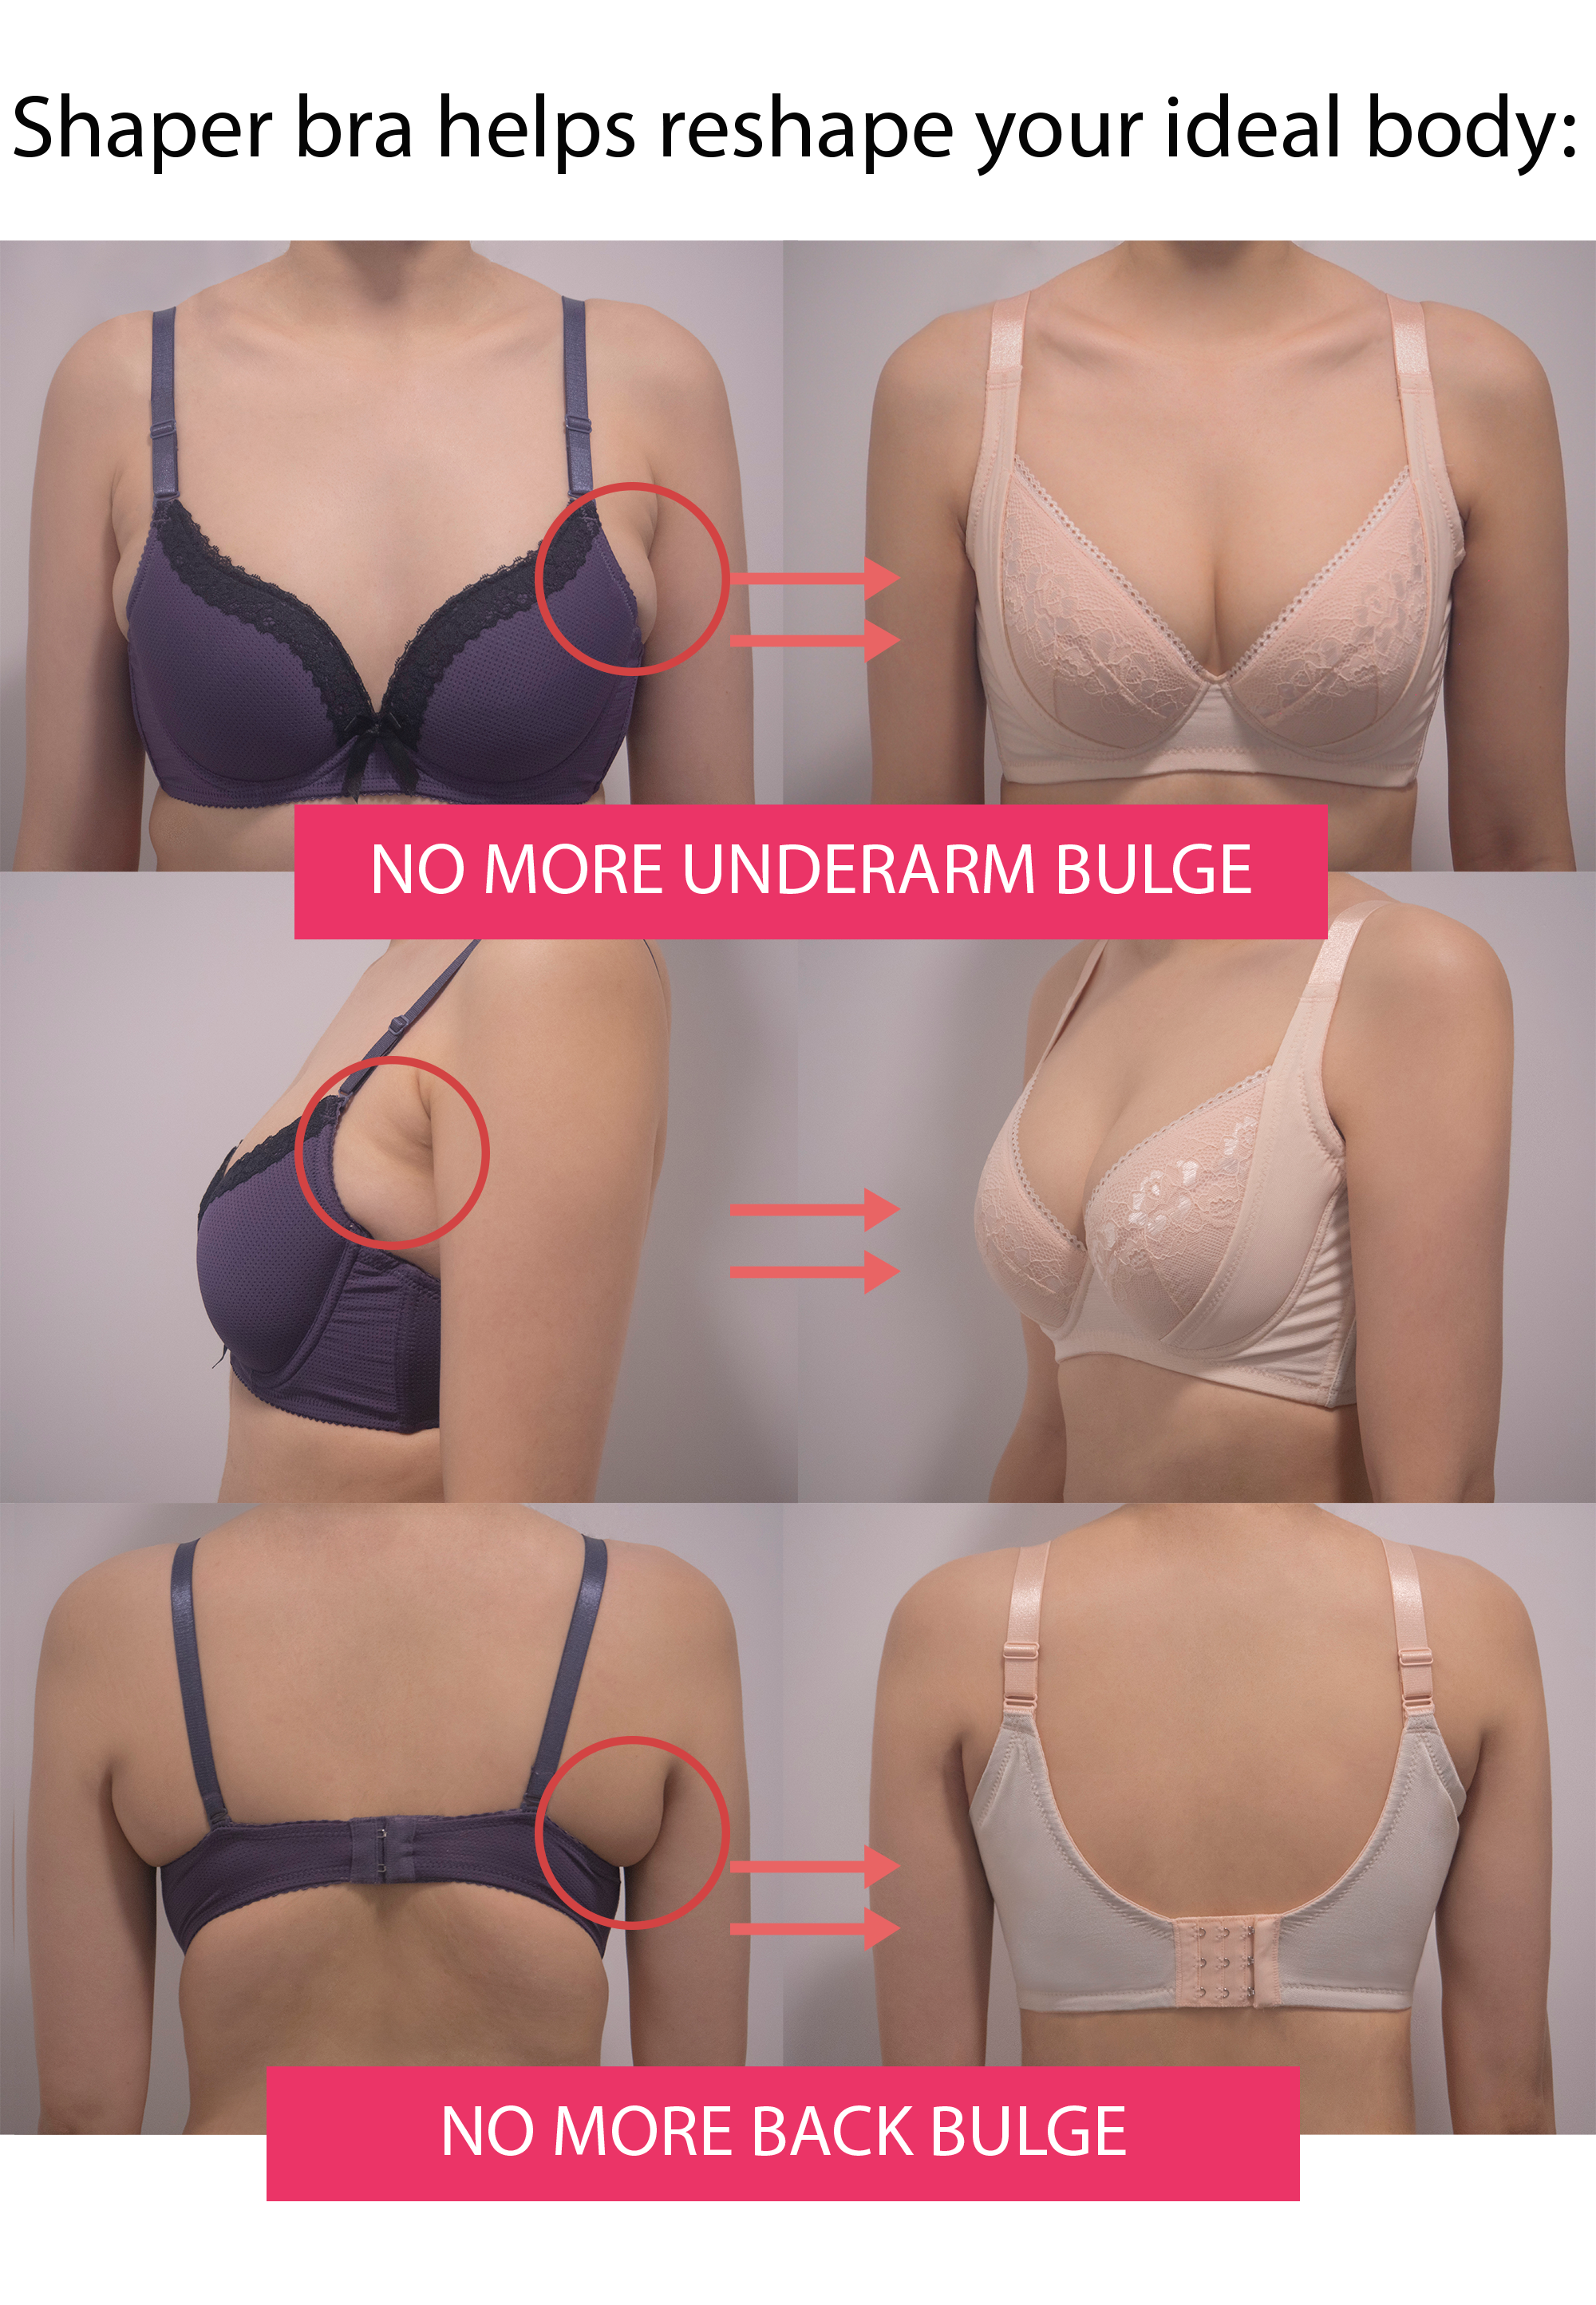 What is the average bra size of a 16 year old? - Quora